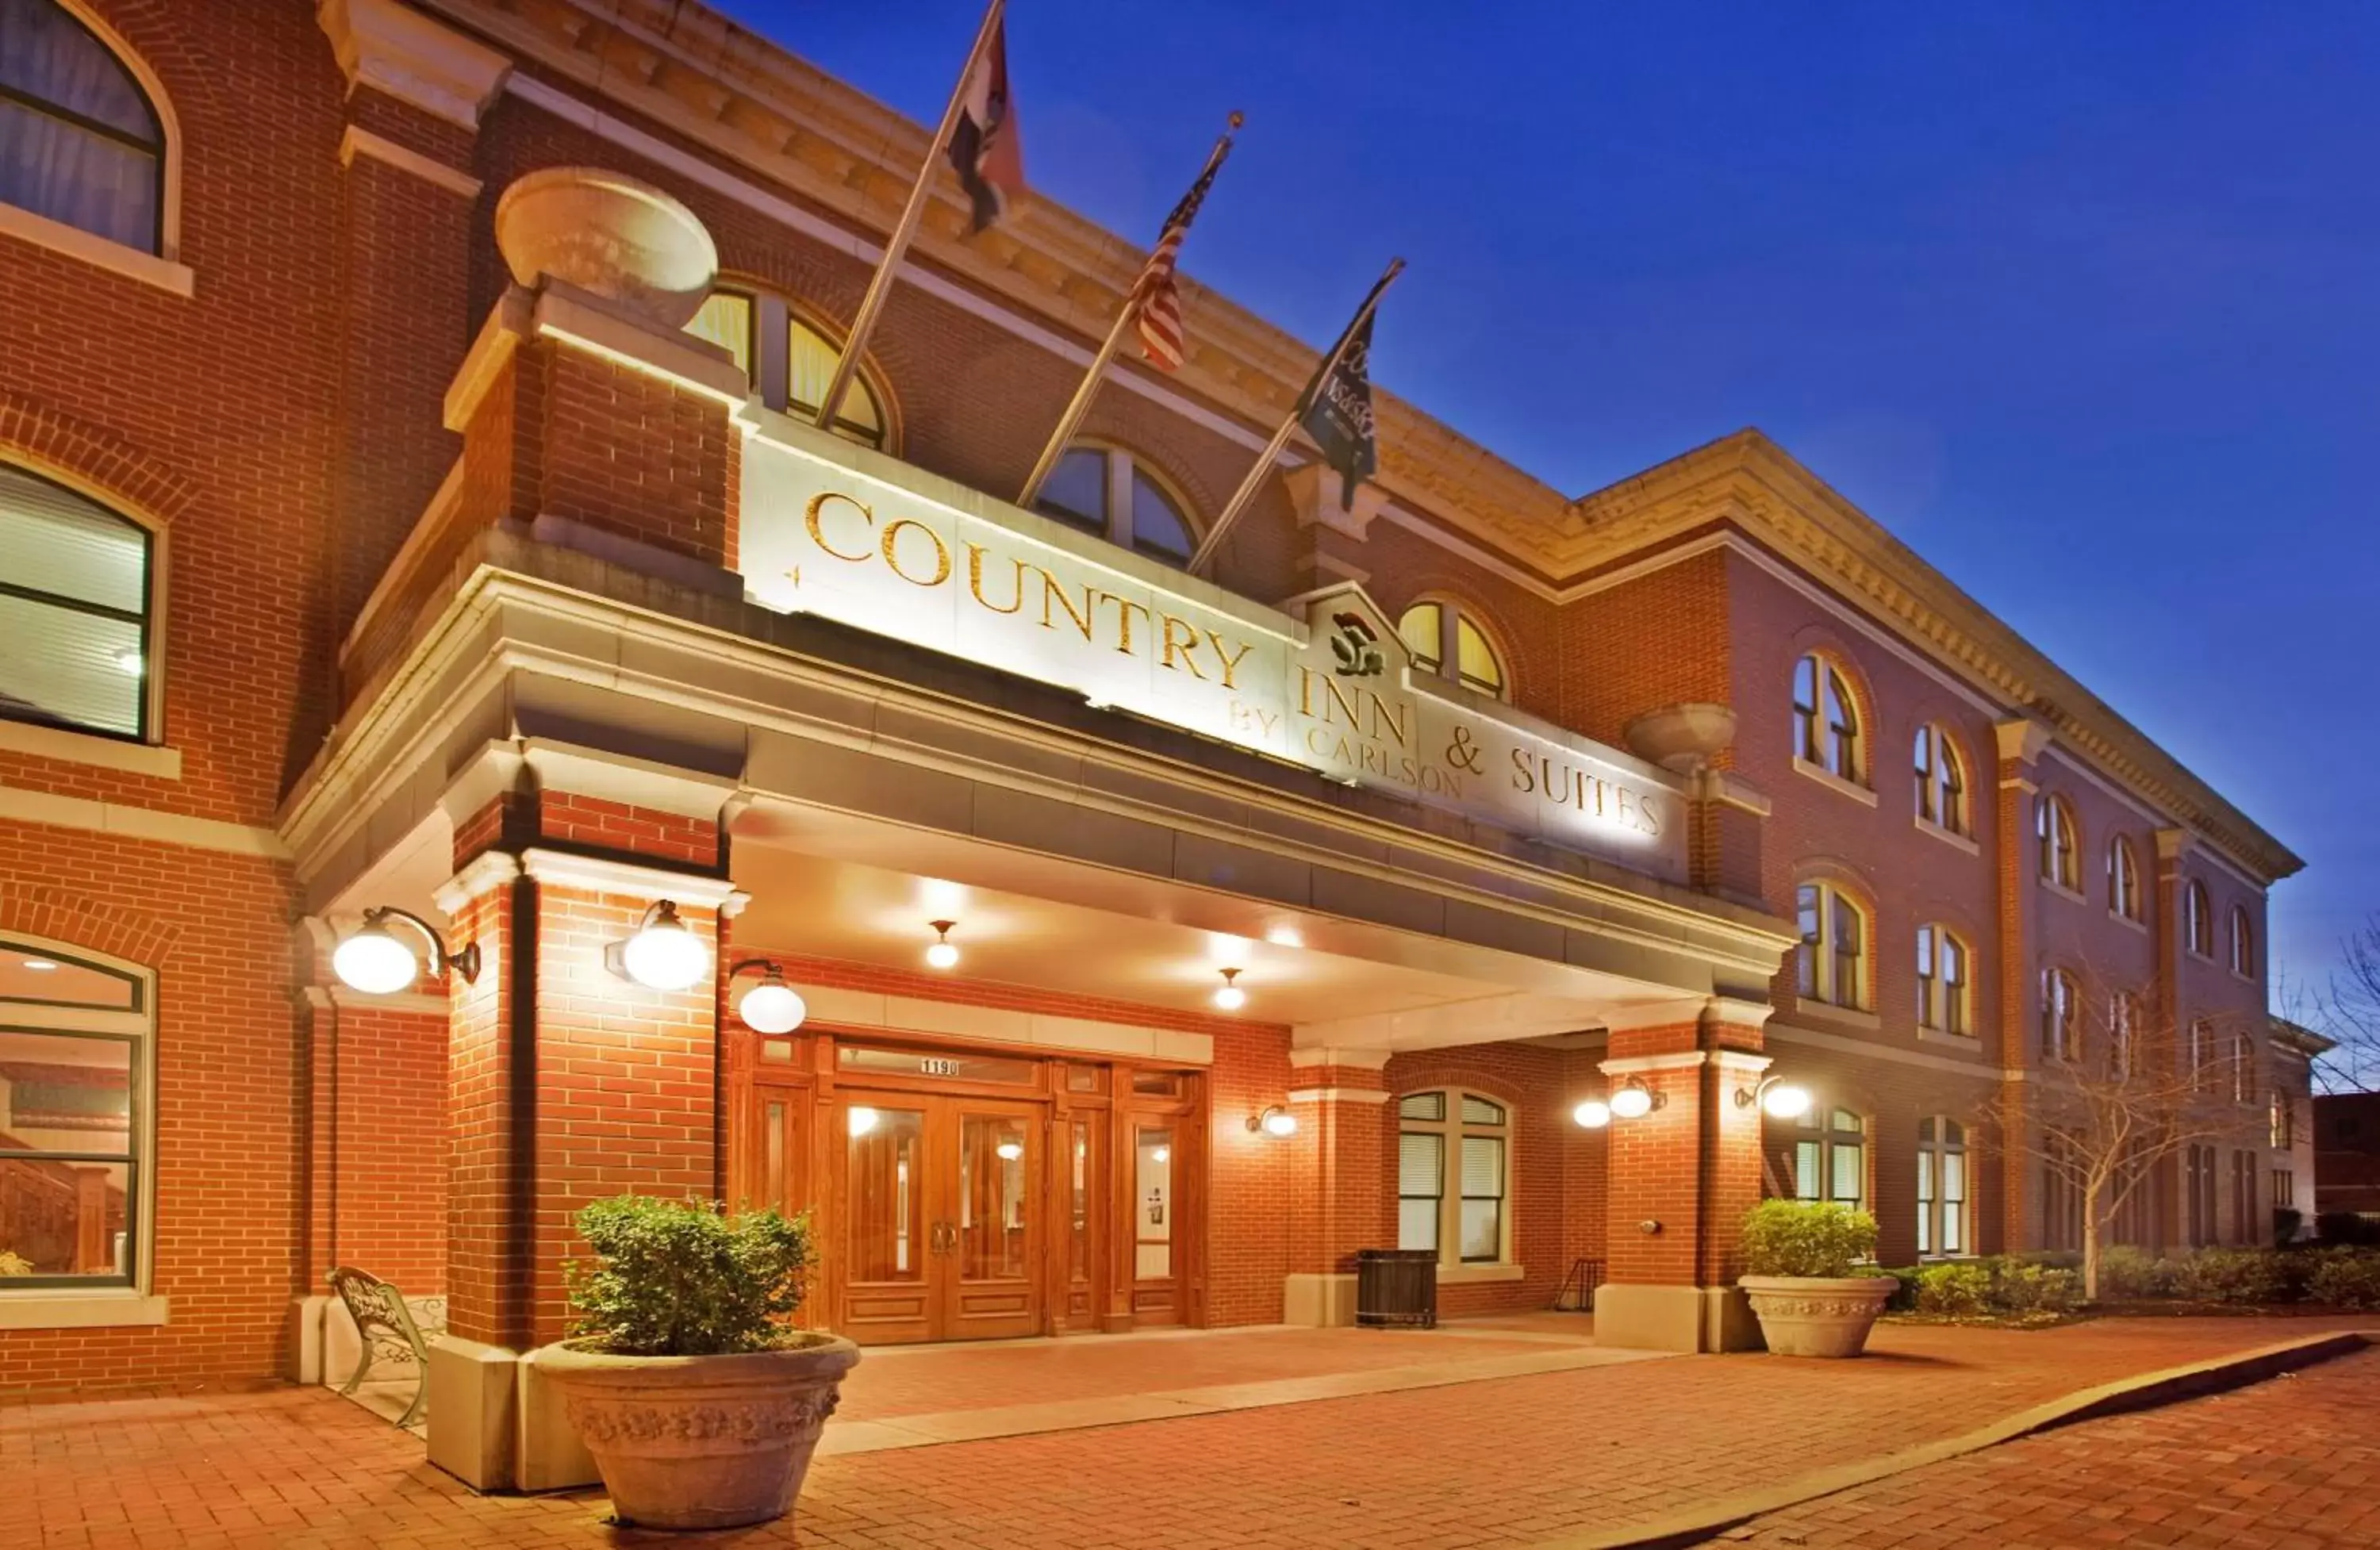 Facade/entrance, Property Building in Country Inn & Suites by Radisson, St. Charles, MO